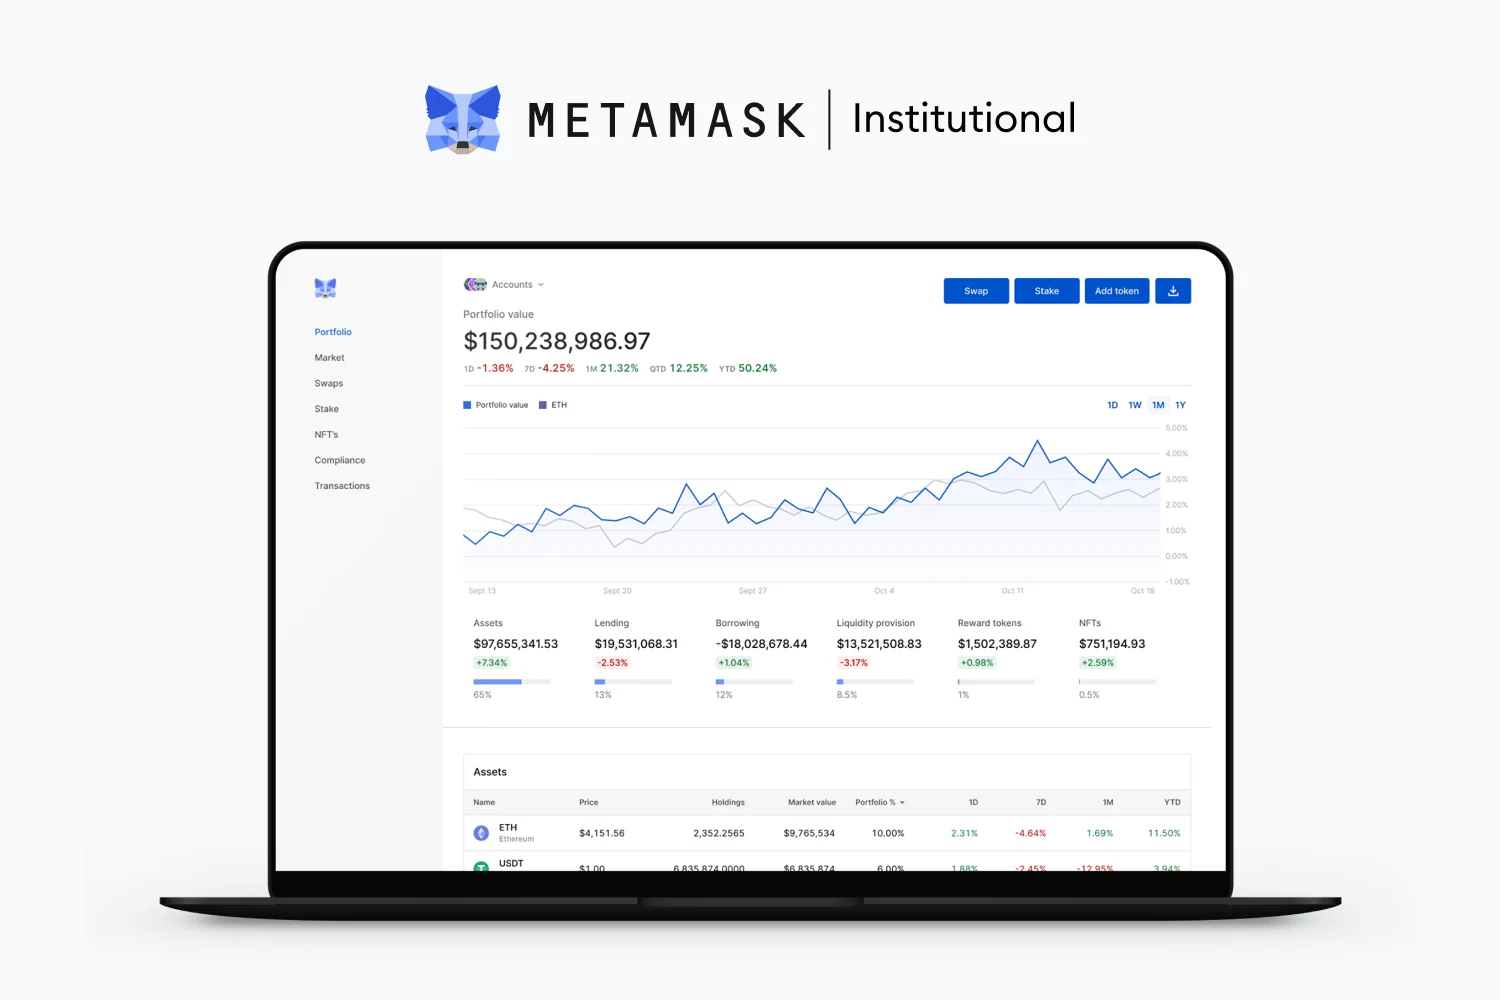 Image: MetaMask Institutional Launches DeFi and Web3-focused Dashboard for Organizations